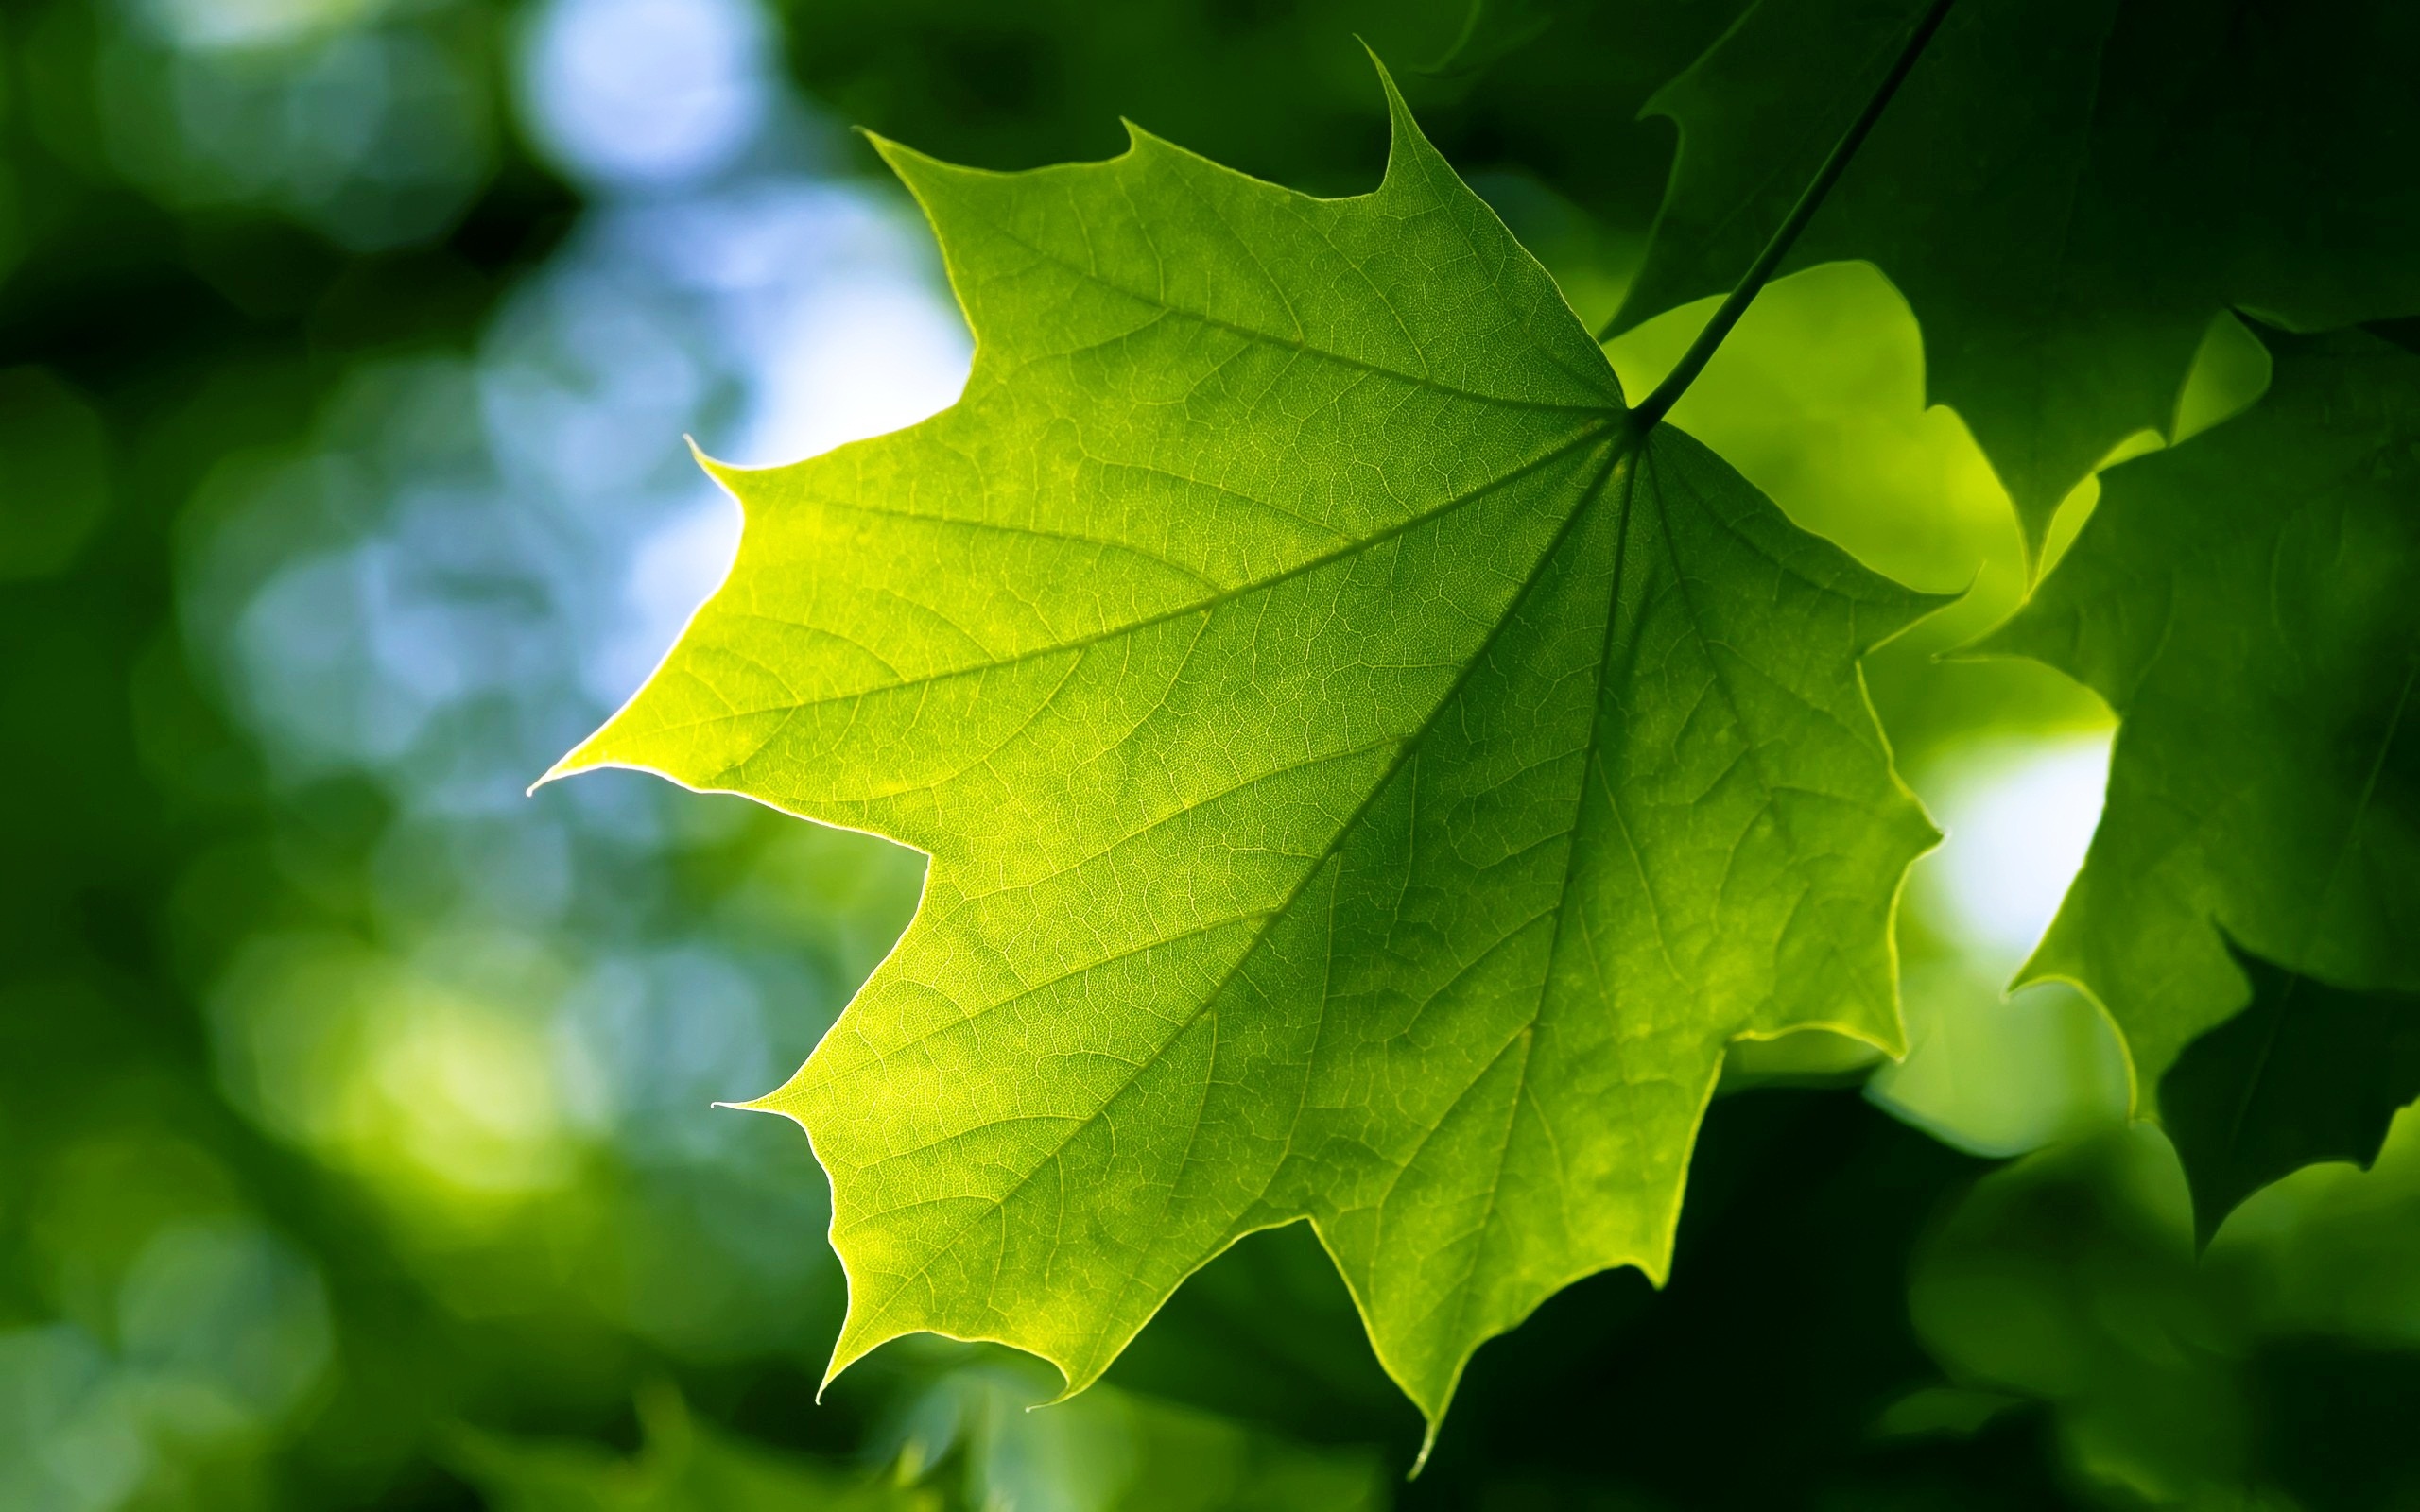 Green Leaf Wallpapers in jpg format for free download